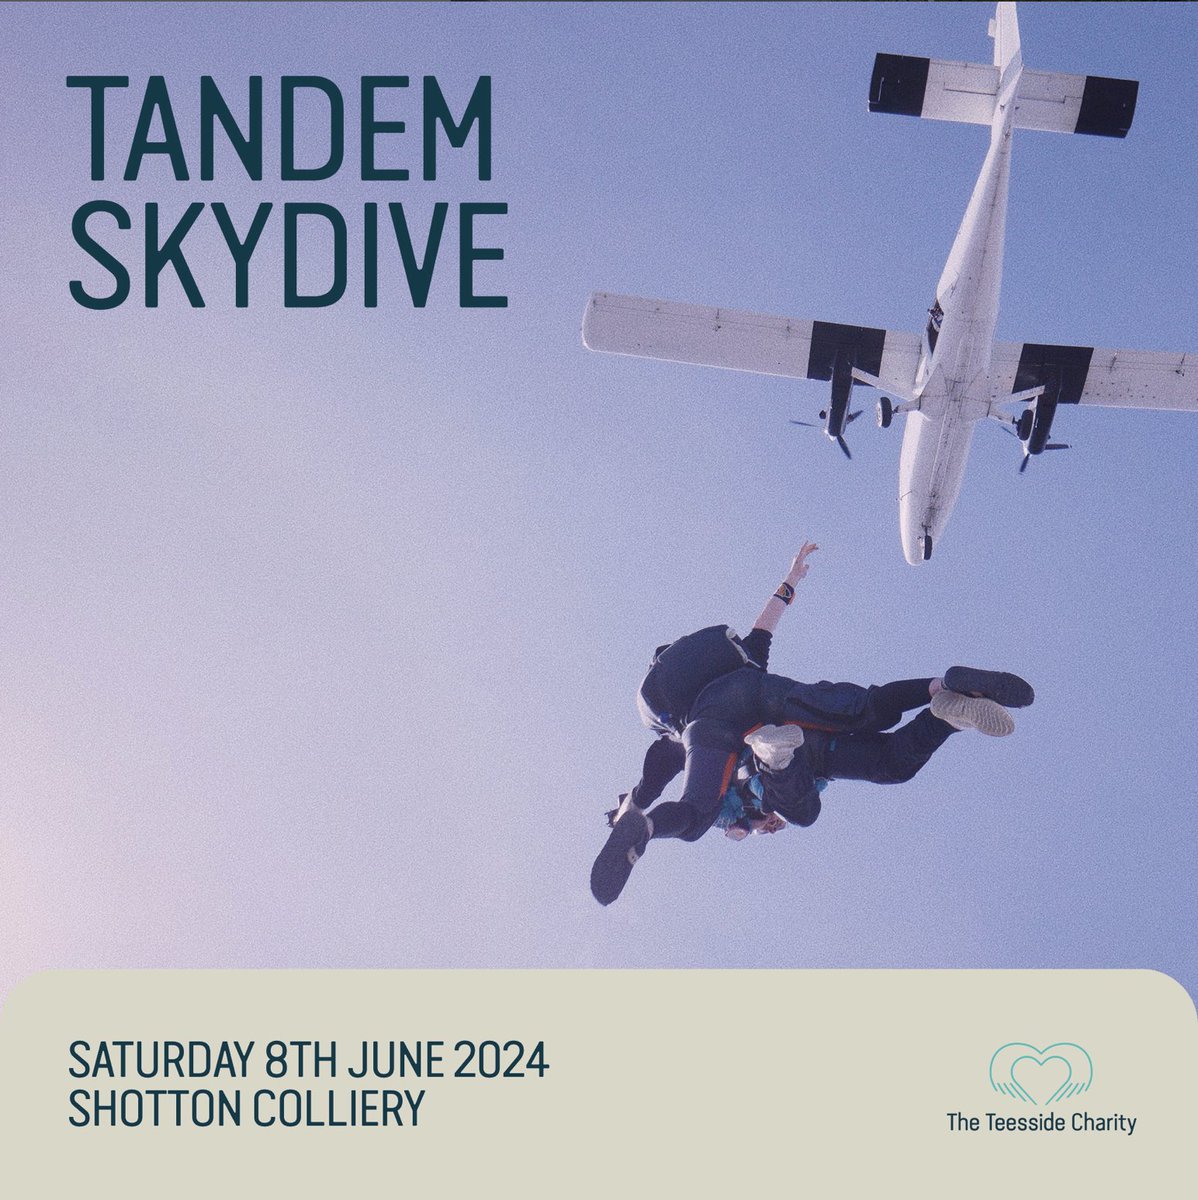 We've secured 5 places for our tandem skydive‼️

Take on a thrilling 10,000-foot leap at Durham Parachute Centre in Shotton Colliery on Saturday,8th June, at 8:00 am ☁️

👉 teessidecharity.org.uk/events/tandem-…